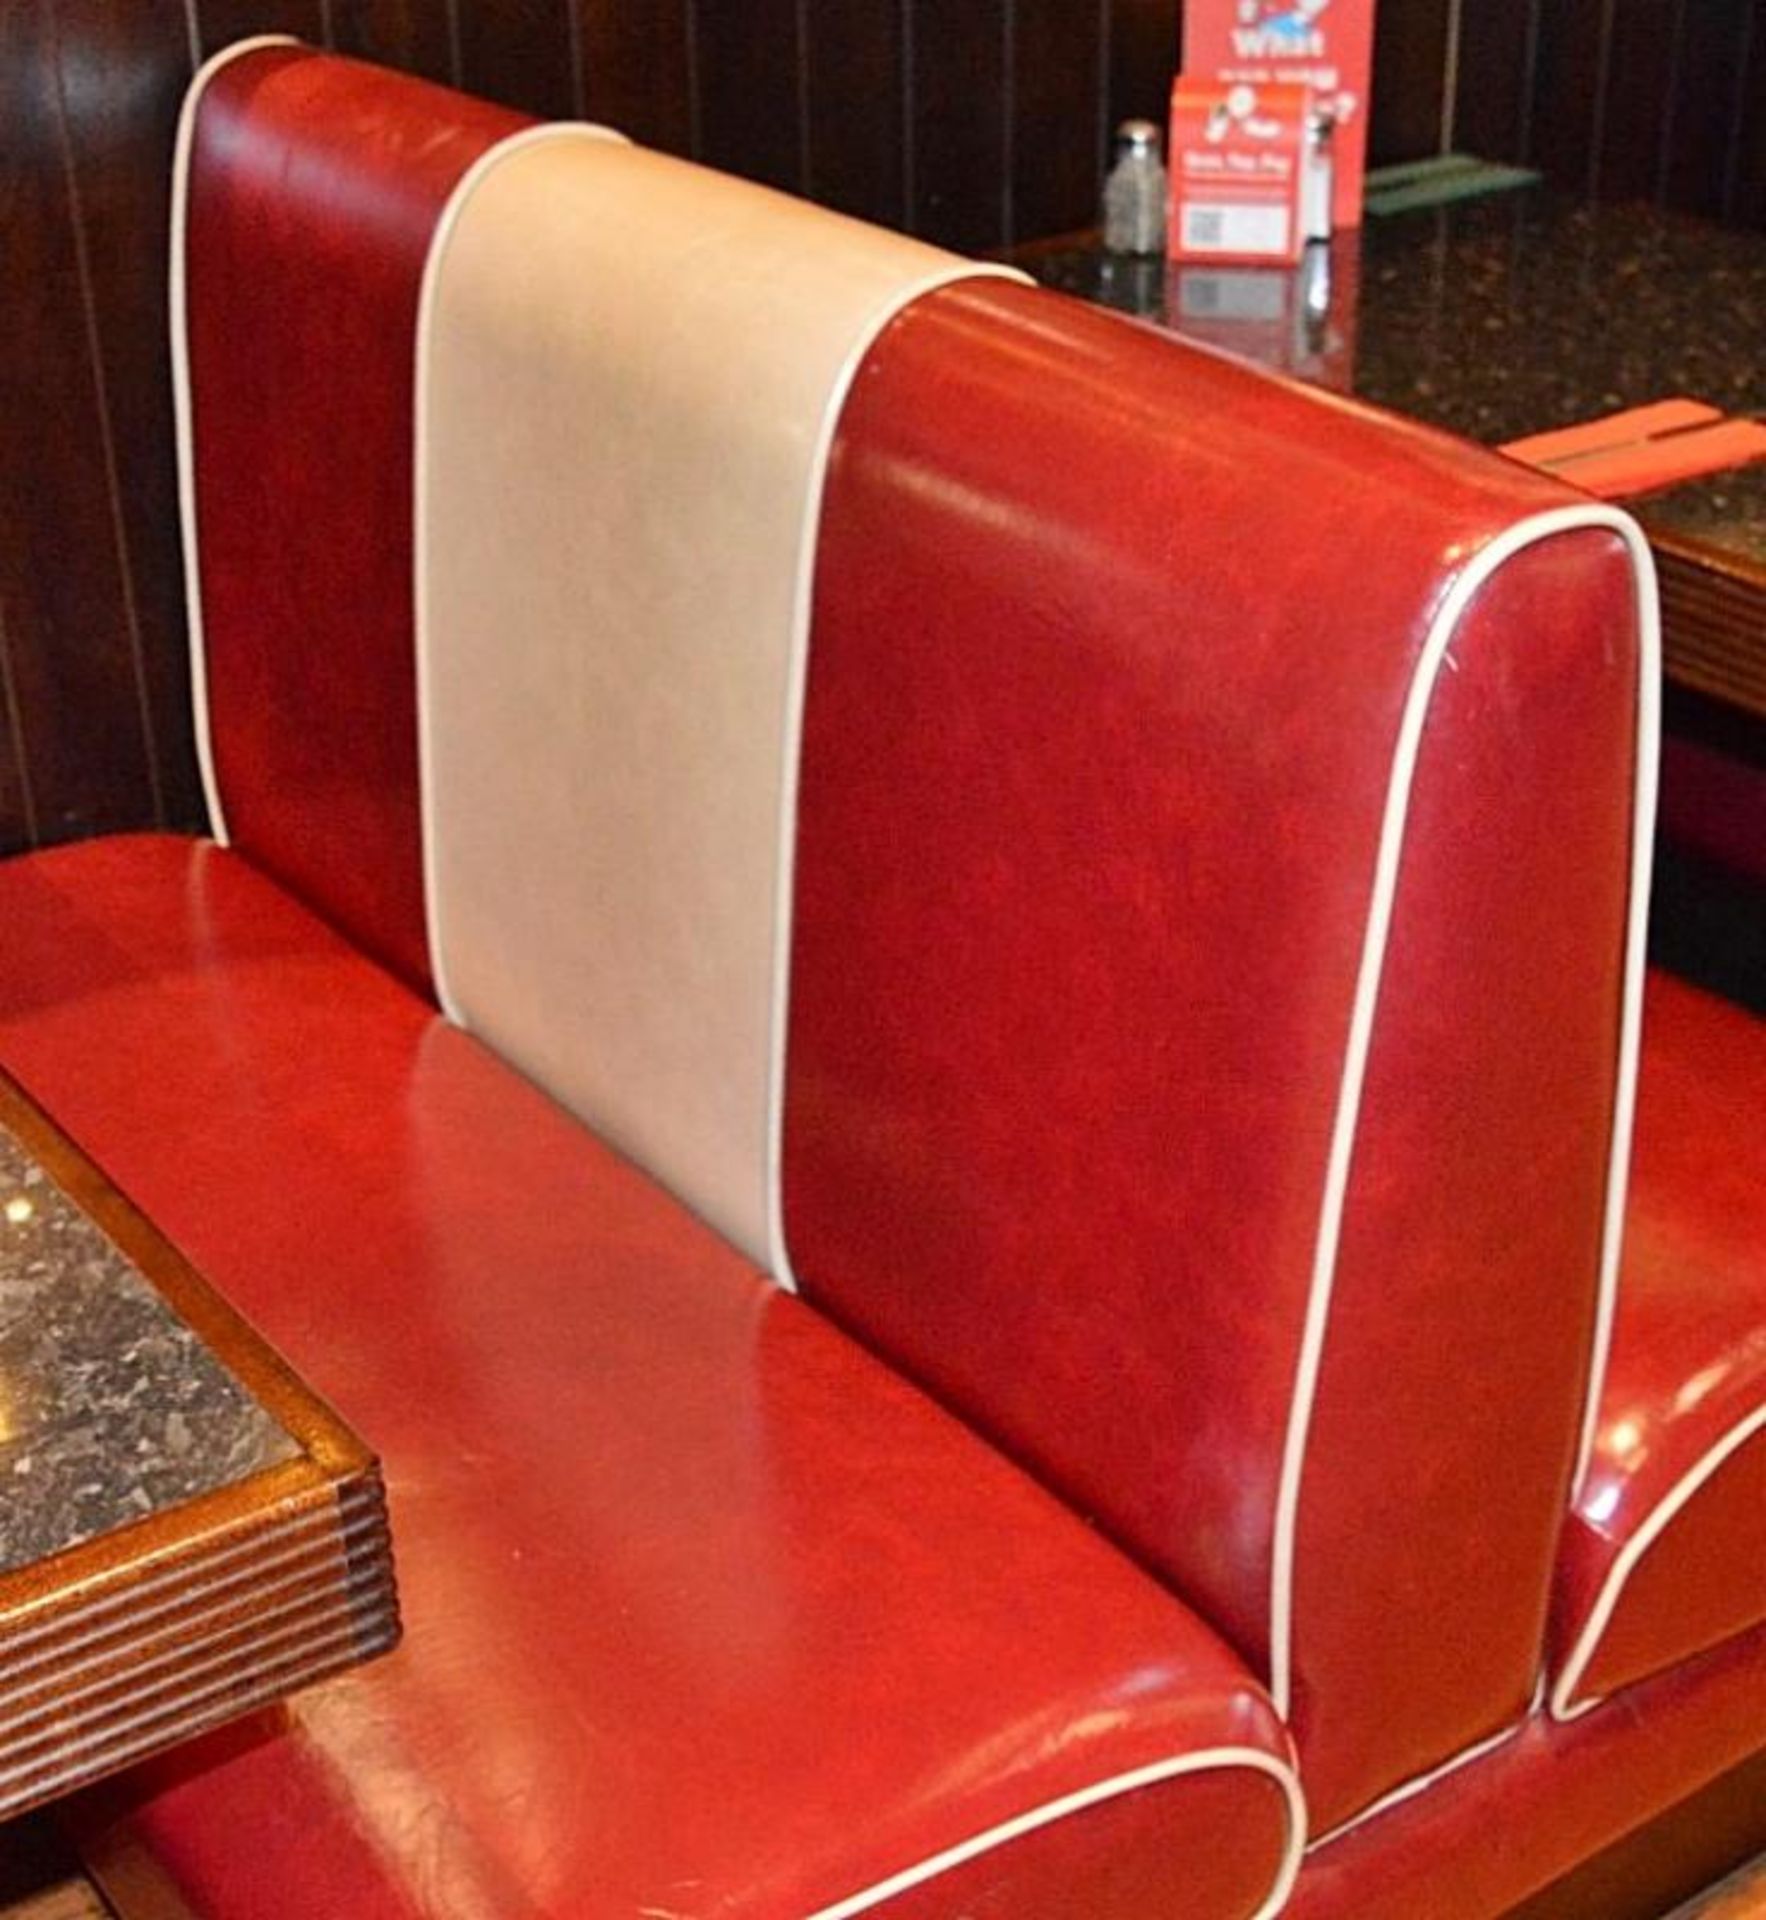 4 x Contemporary Double-Sided Booth Seating Benches - All Upholstered In A Bright Red Faux Leather - - Image 4 of 4